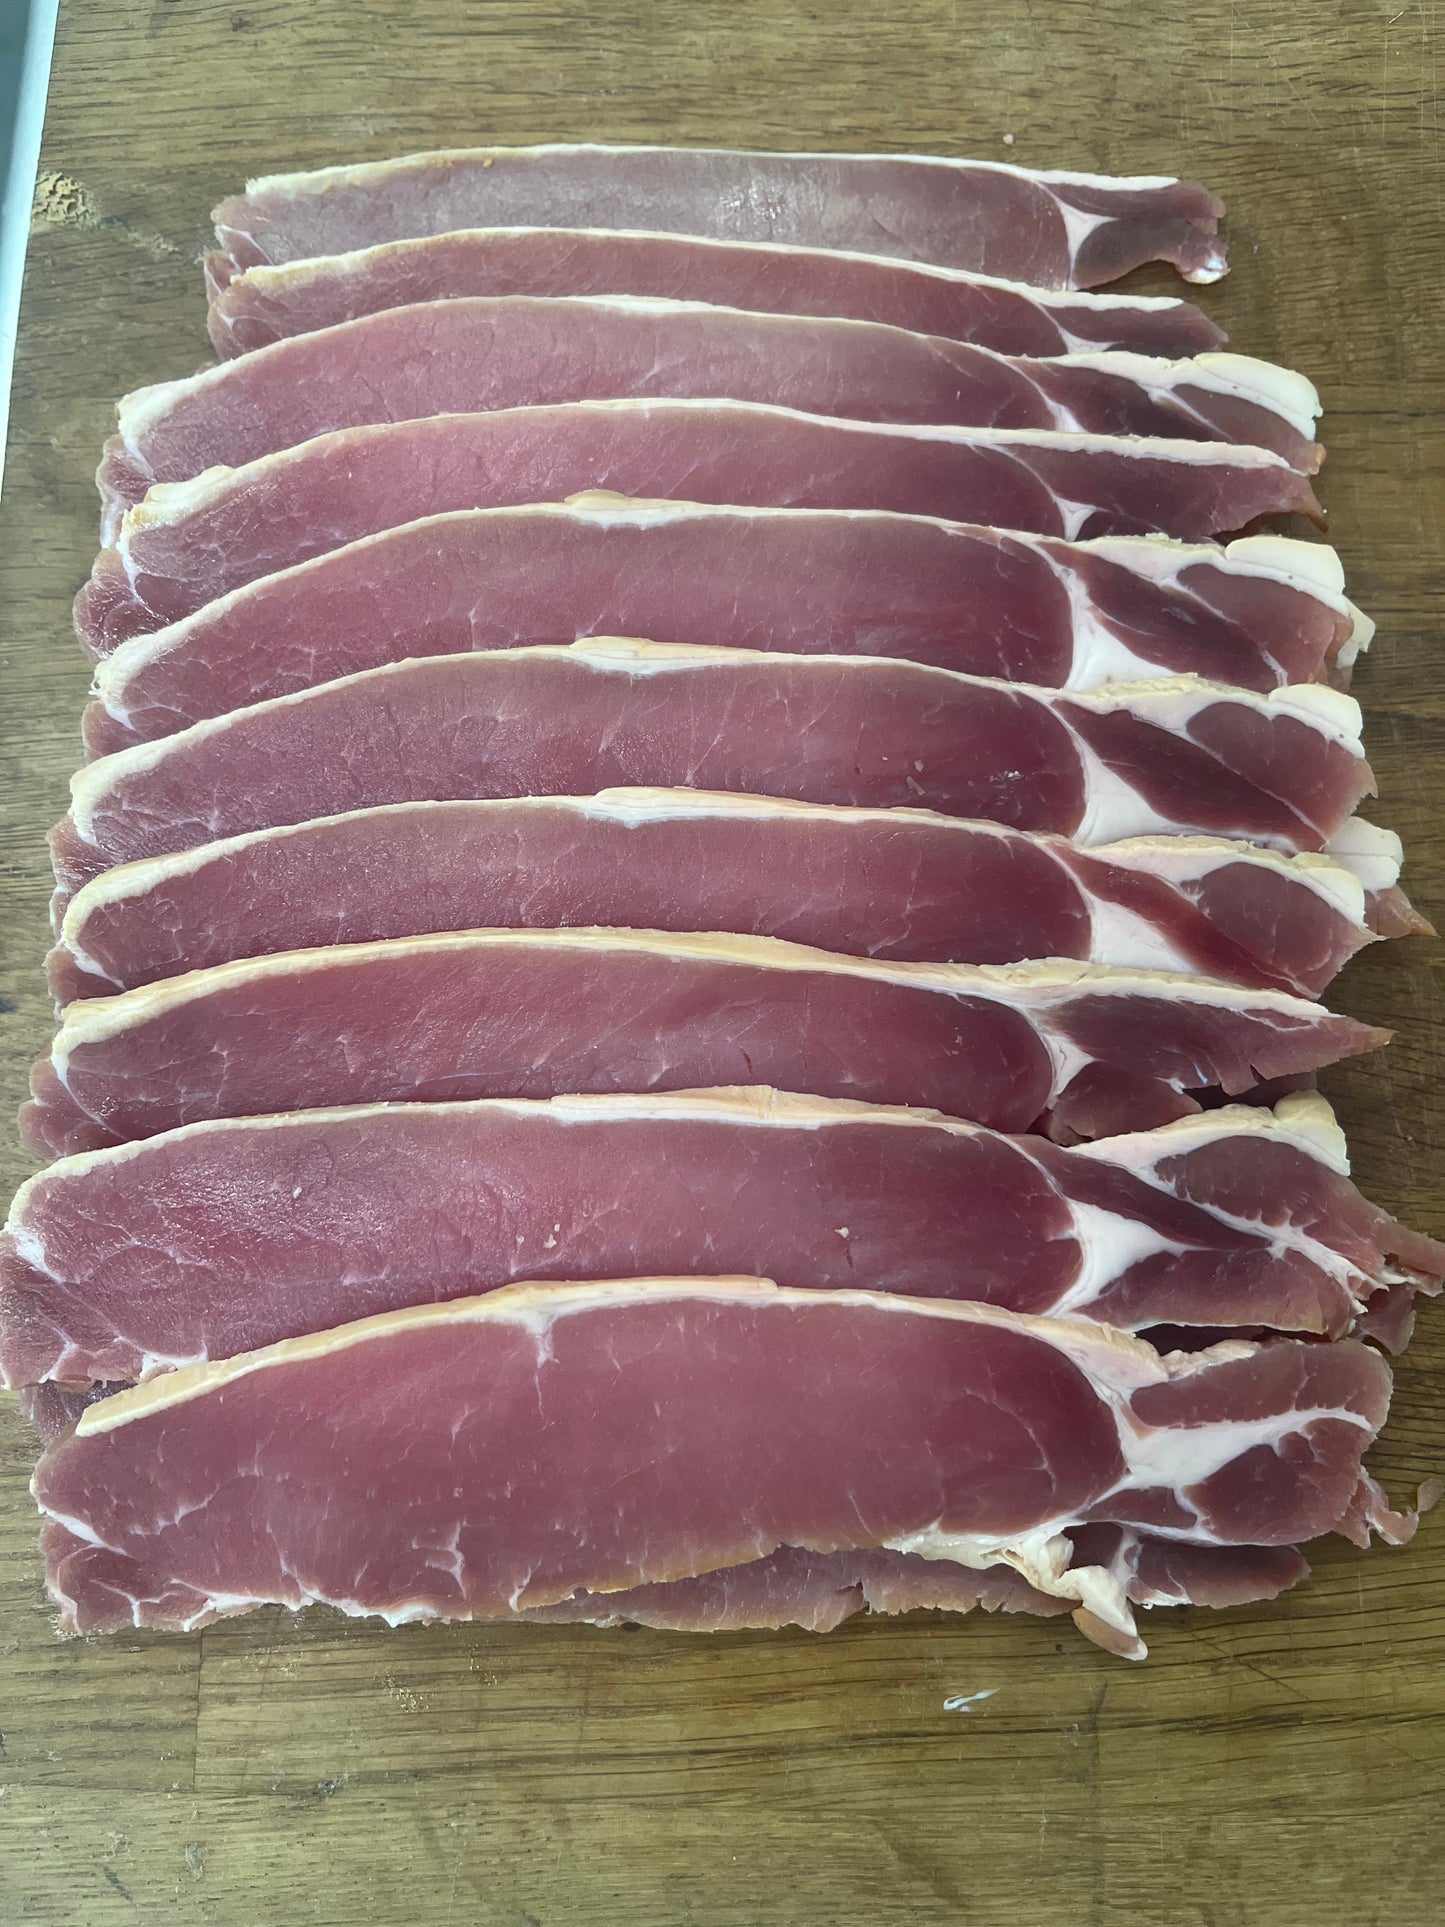 Smoked Dry Cured Back Bacon